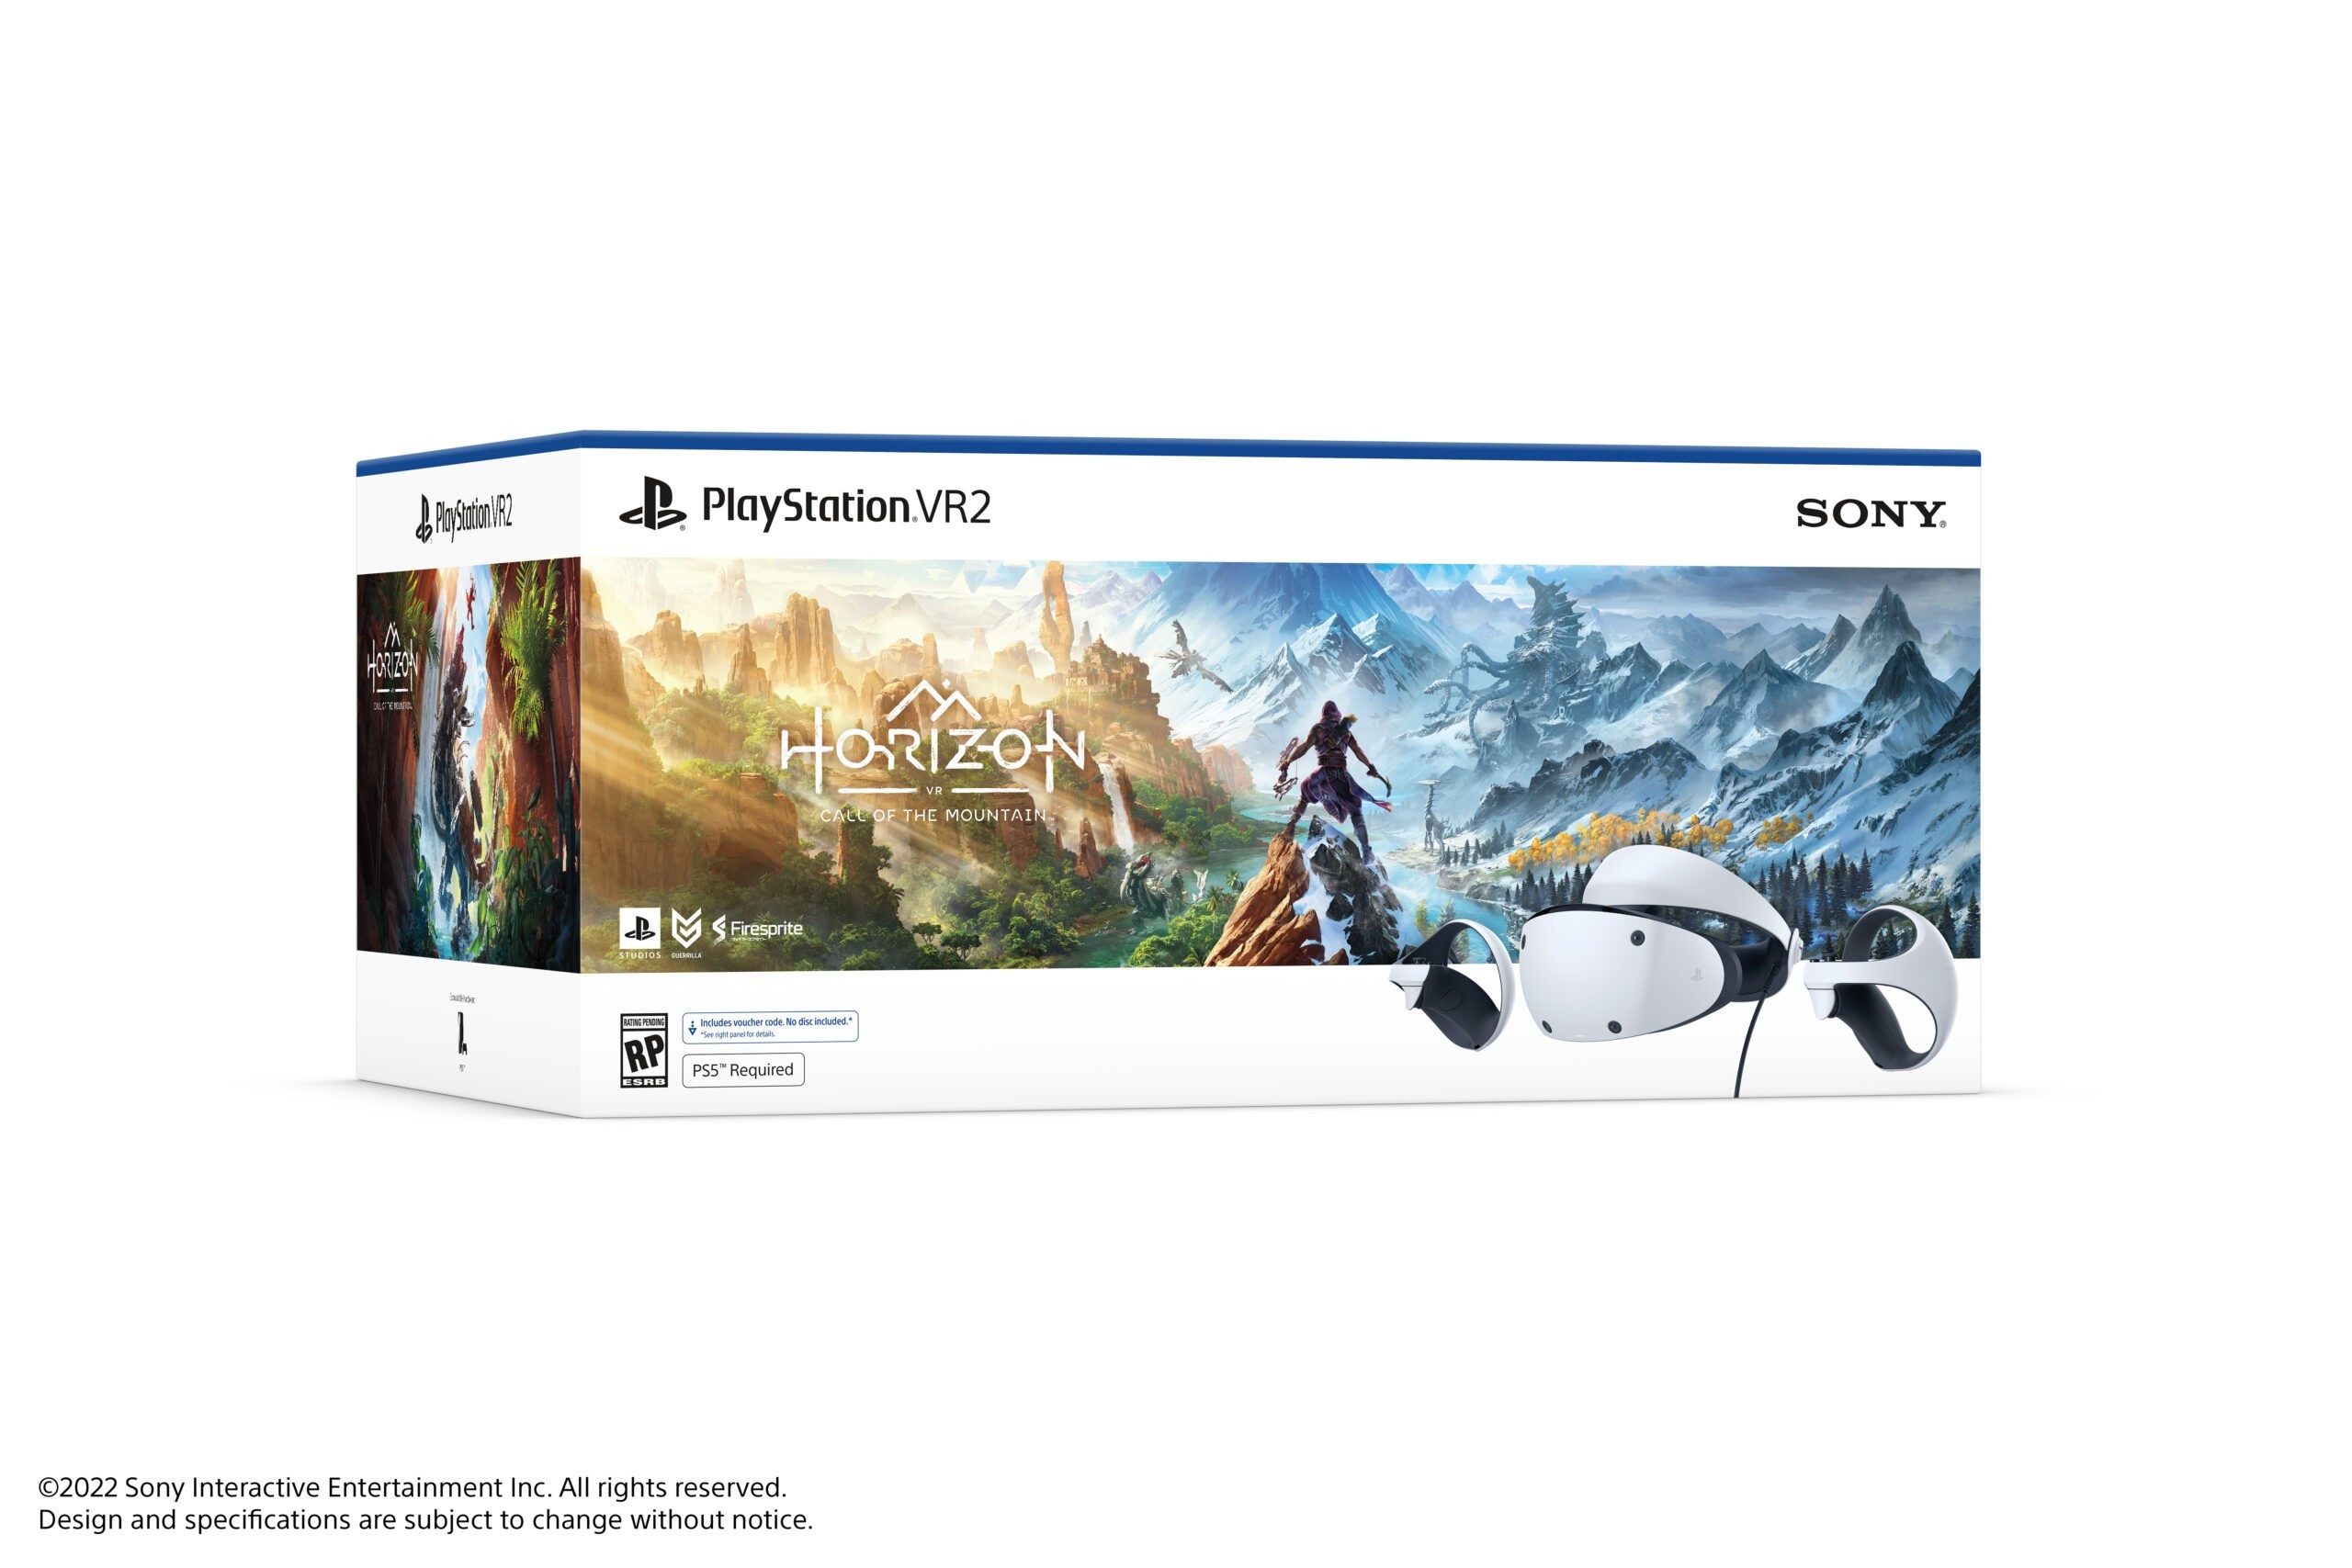 Sony Playstation VR2 priced in the Philippines - YugaGaming